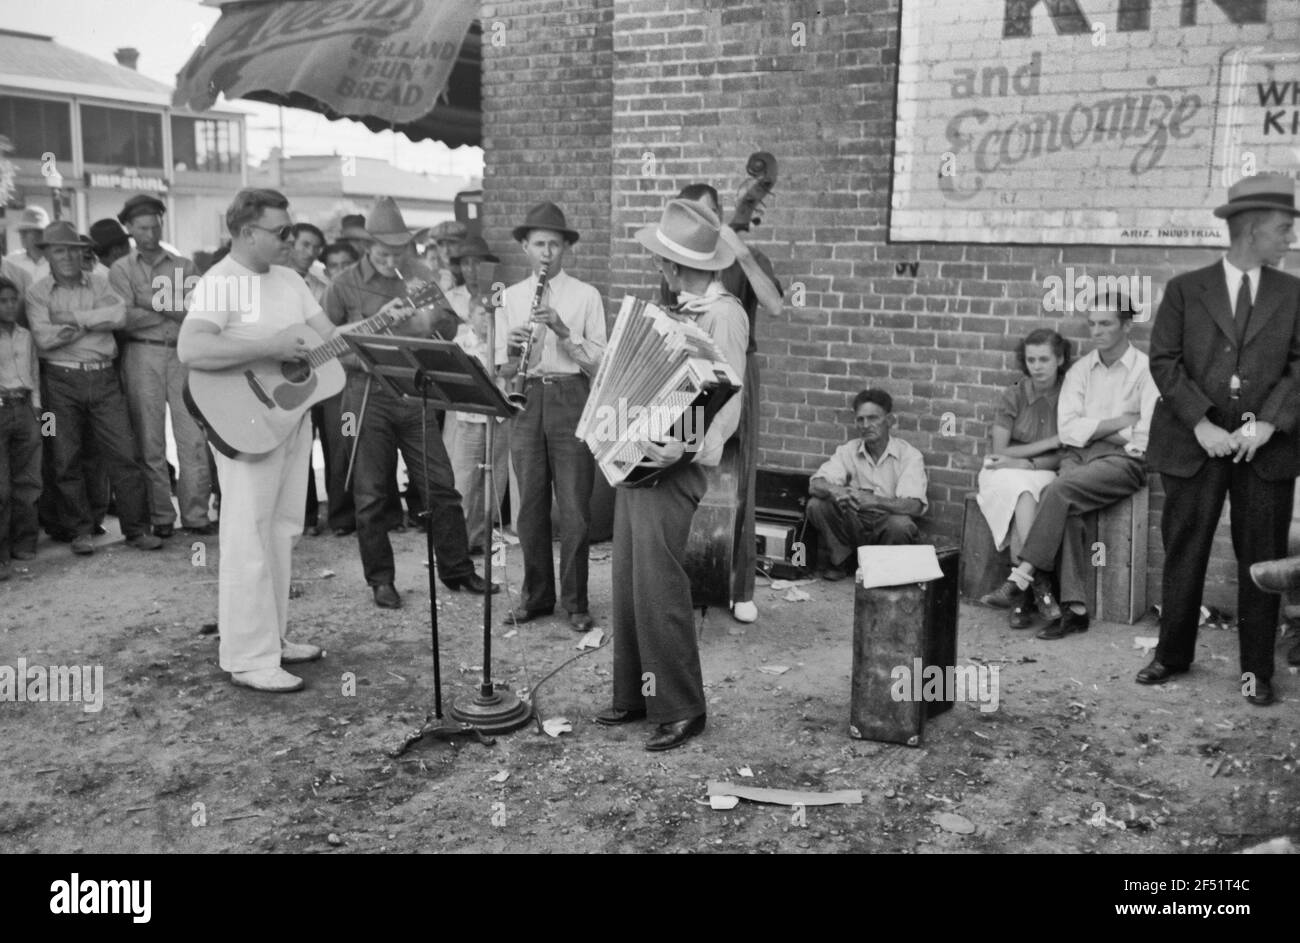 Orchestra playing outside a grocery store on Saturday afternoon which is designed to attract customers to the store, Phoenix, Arizona - 1940 Stock Photo